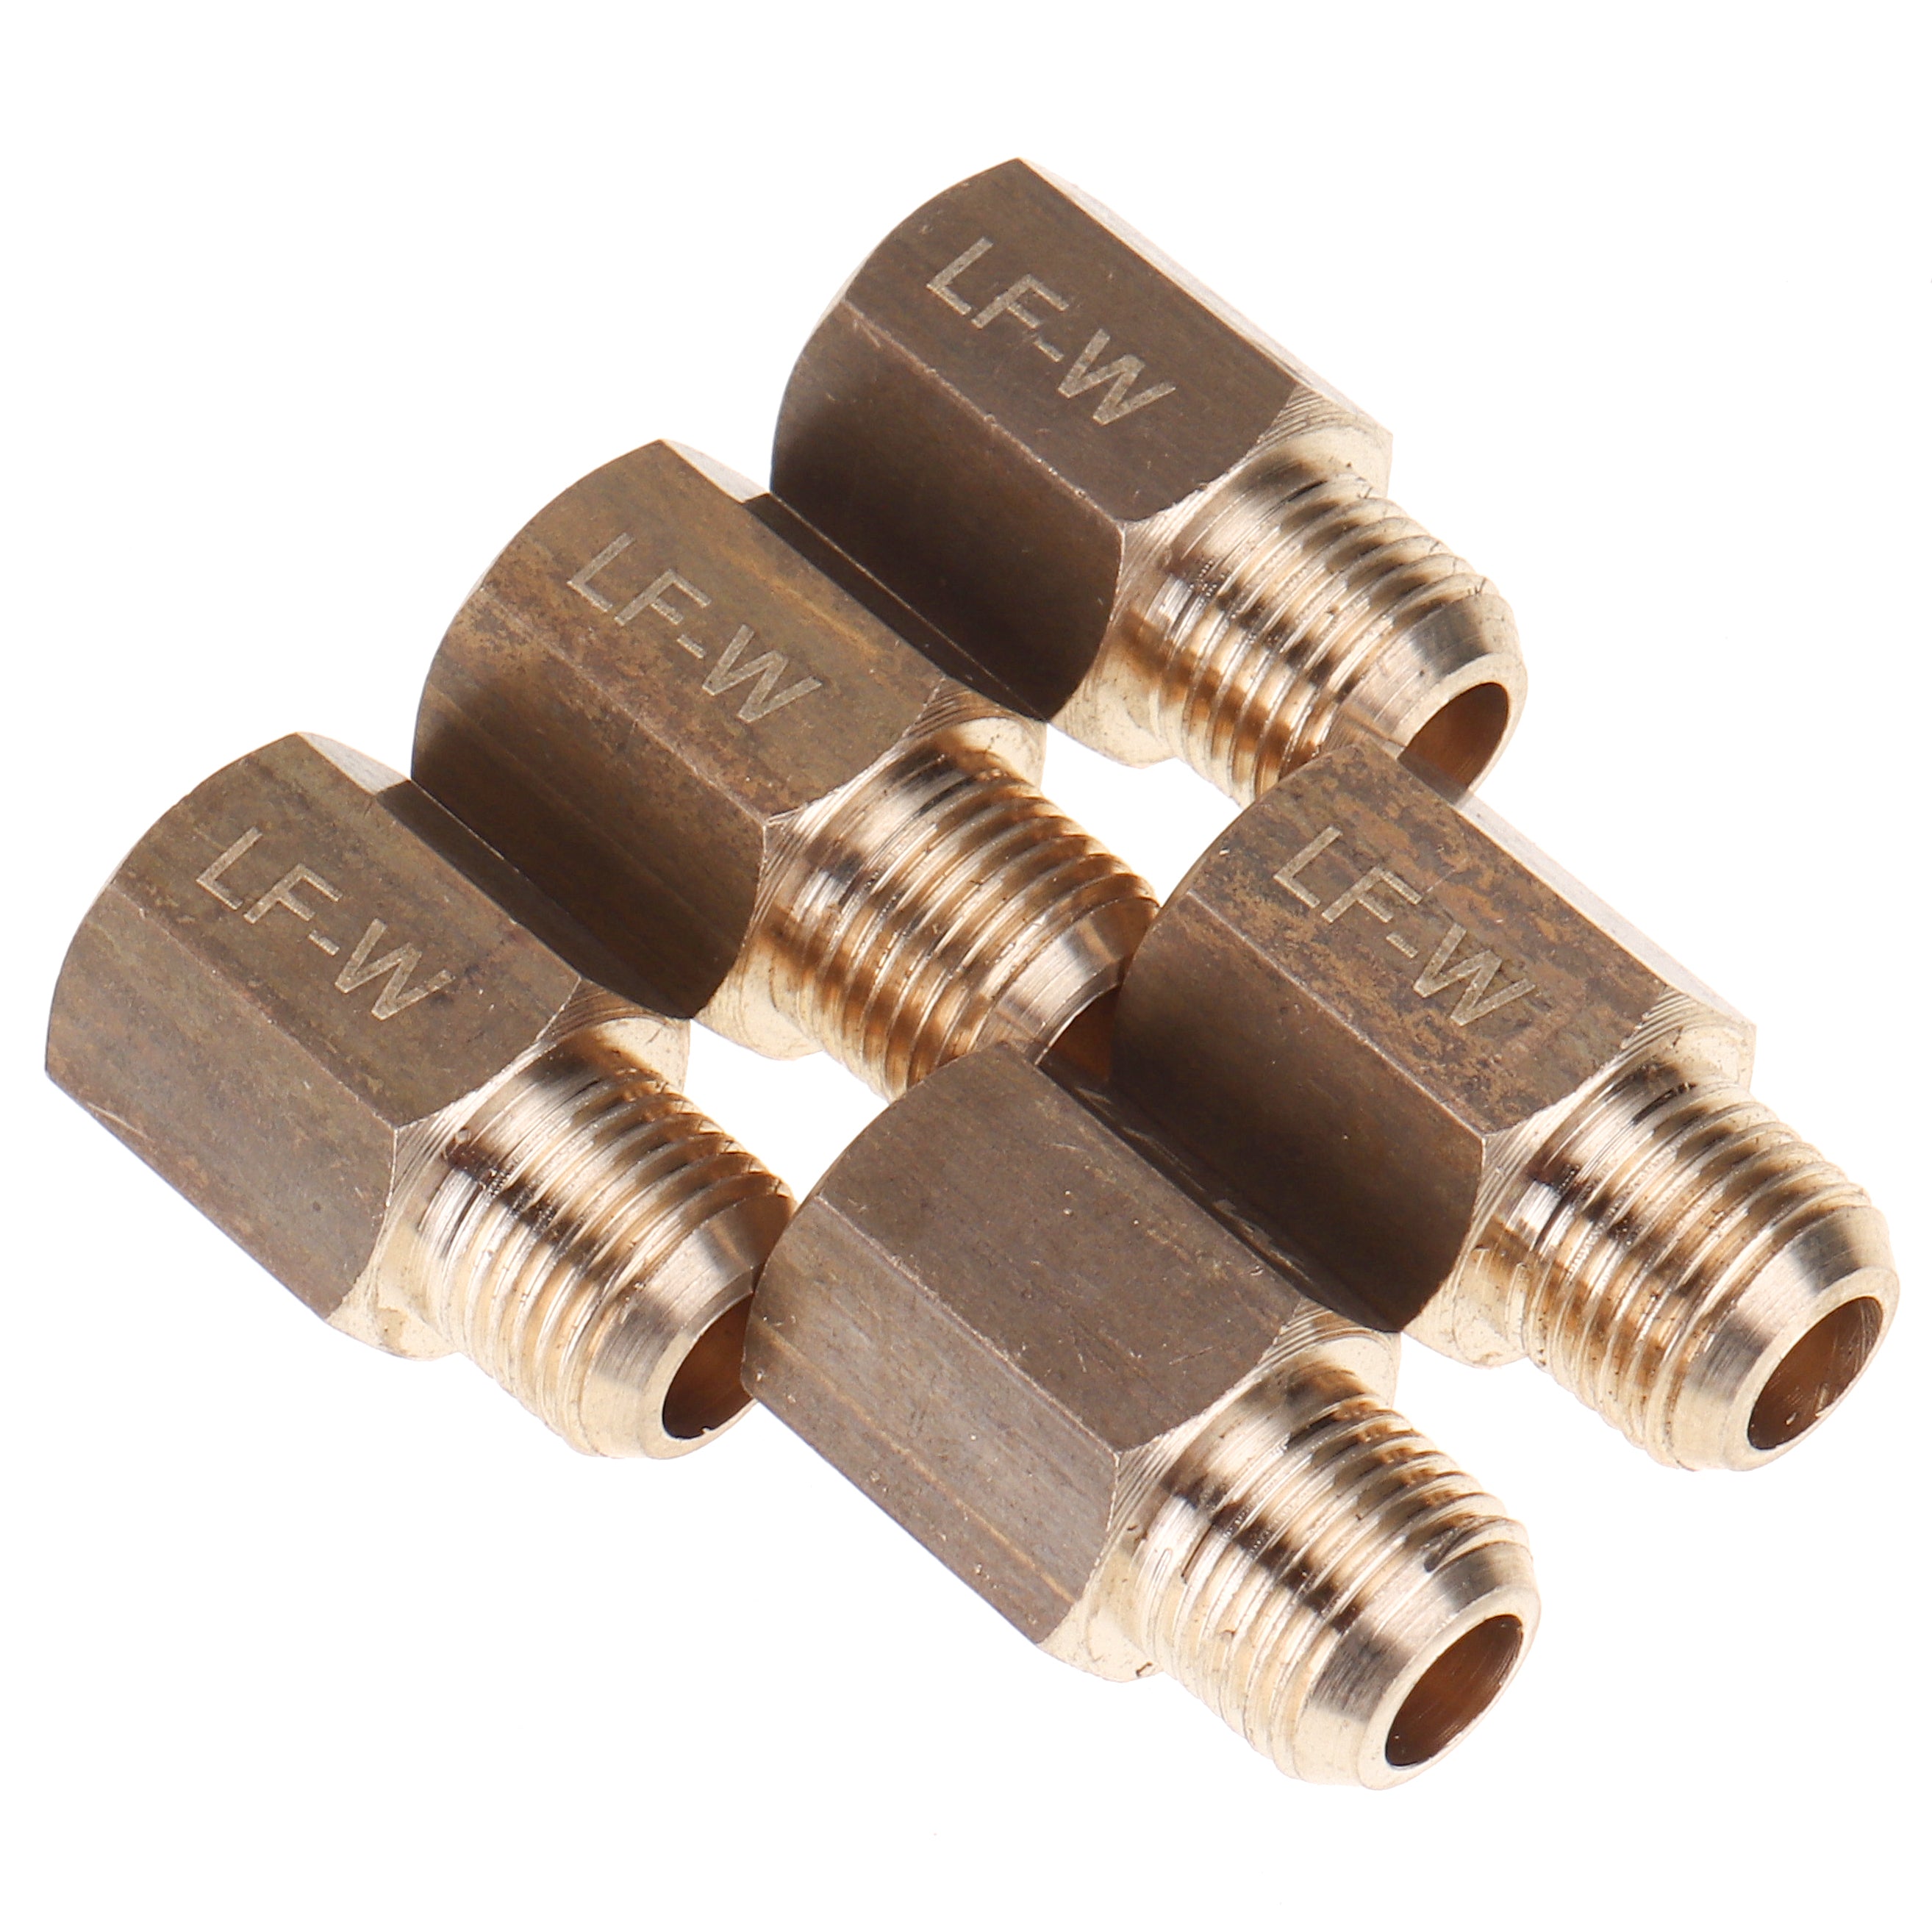 LTWFITTING Lead Free Brass Pipe 1/8 Inch Male x 1/8 Inch Female NPT Adapter Fuel Gas Air (Pack of 5)